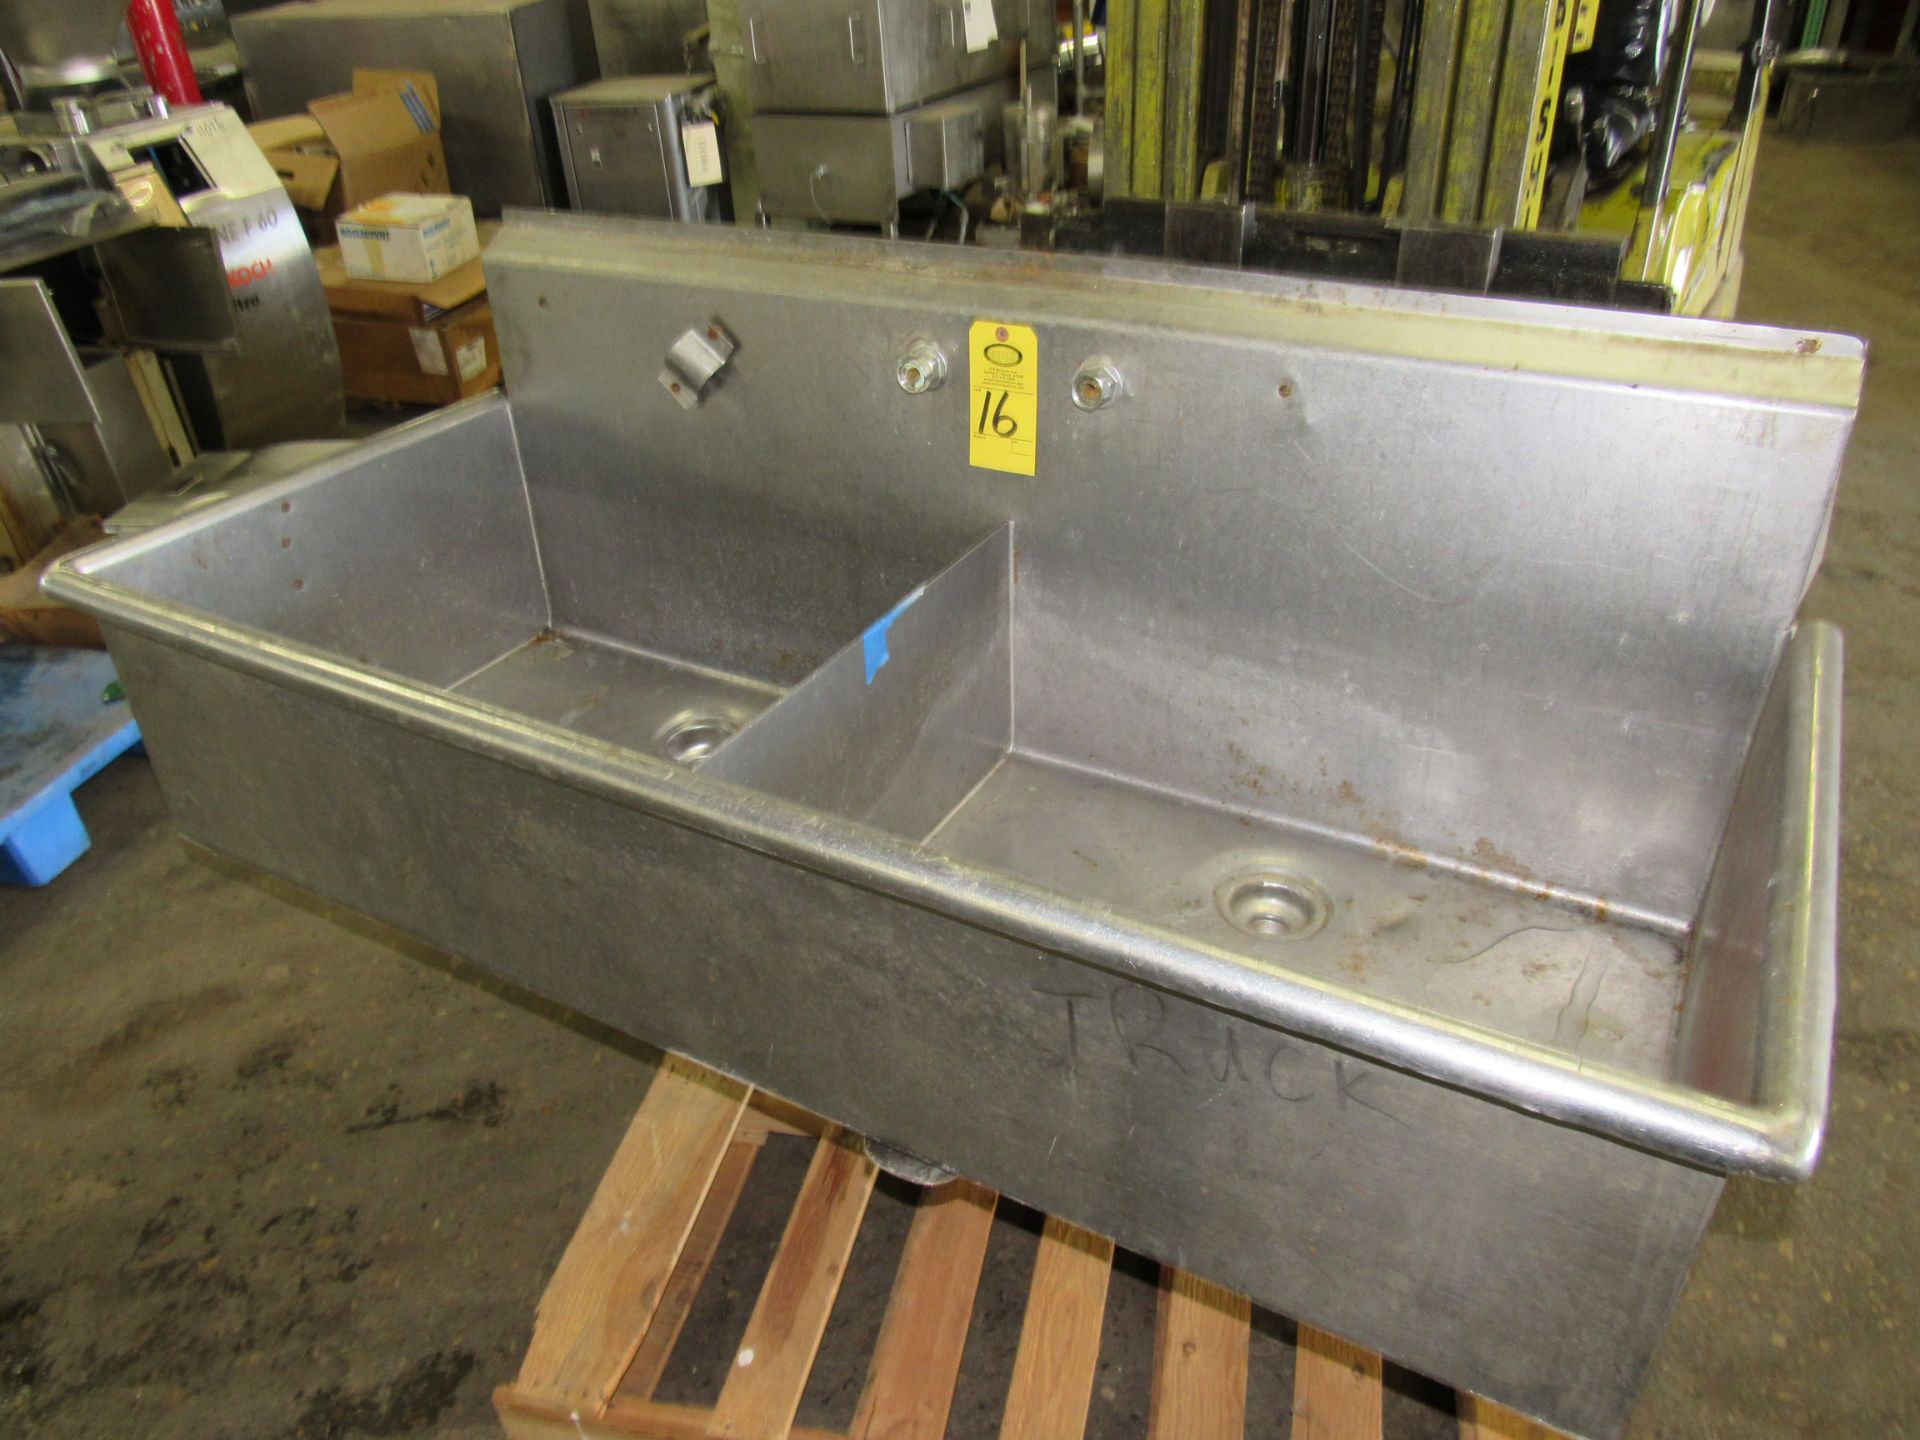 Stainless Steel Sink, 25" W X 62" L, (2) tubs 31" L X 25" W X 13" D, space for (2) faucets, no legs